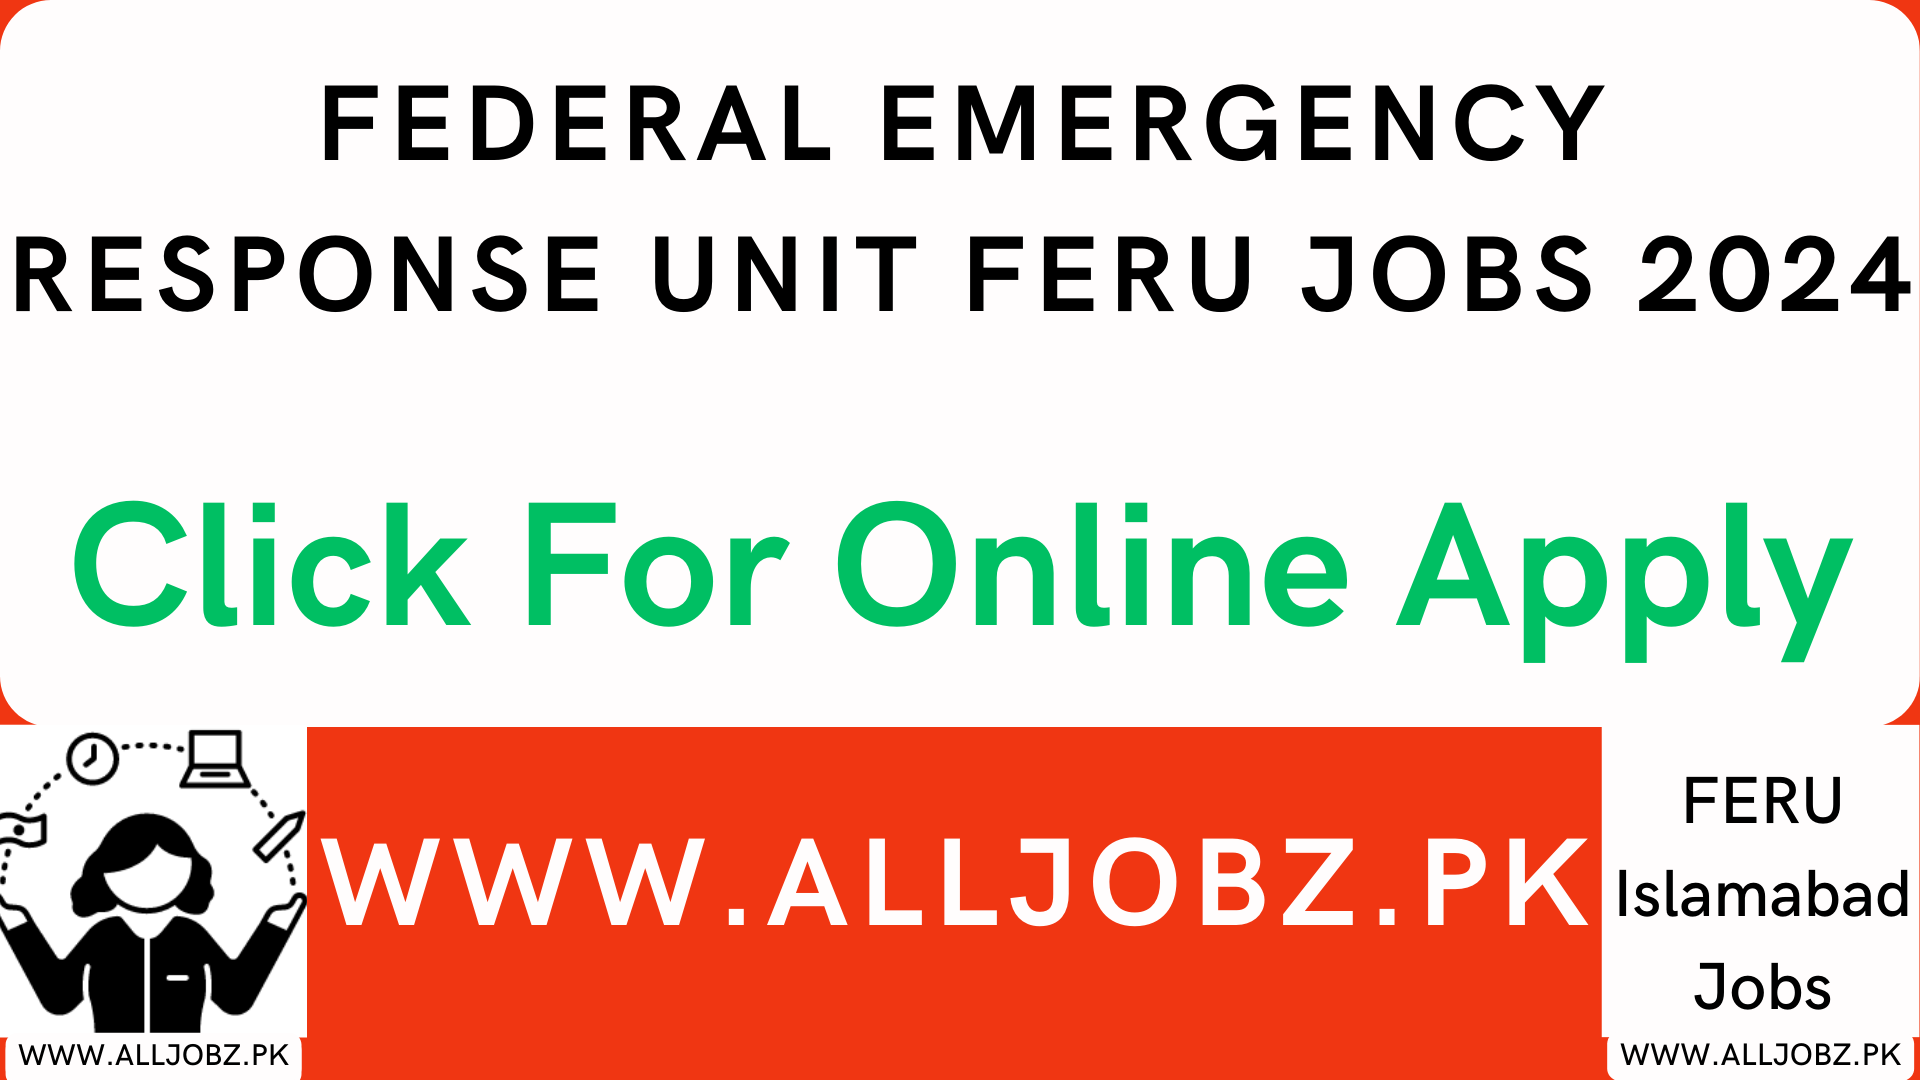 Job Opportunities At Federal Emergency Response Unit Feru Jobs 2024 Online Apply, Federal Emergency Response Unit Feru Jobs 2024 Sindh, Federal Emergency Response Unit Feru Jobs 2024 Salary, Federal Emergency Response Unit Feru Jobs 2024 Karachi, Federal Emergency Response Unit Feru Jobs 2024 Lahore, Federal Emergency Response Unit Feru Jobs 2024 Apply Online, Federal Emergency Response Unit Feru Jobs 2024 Application Form, Federal Emergency Response Unit Islamabad Online Apply, Federal Emergency Response Unit Pakistan,